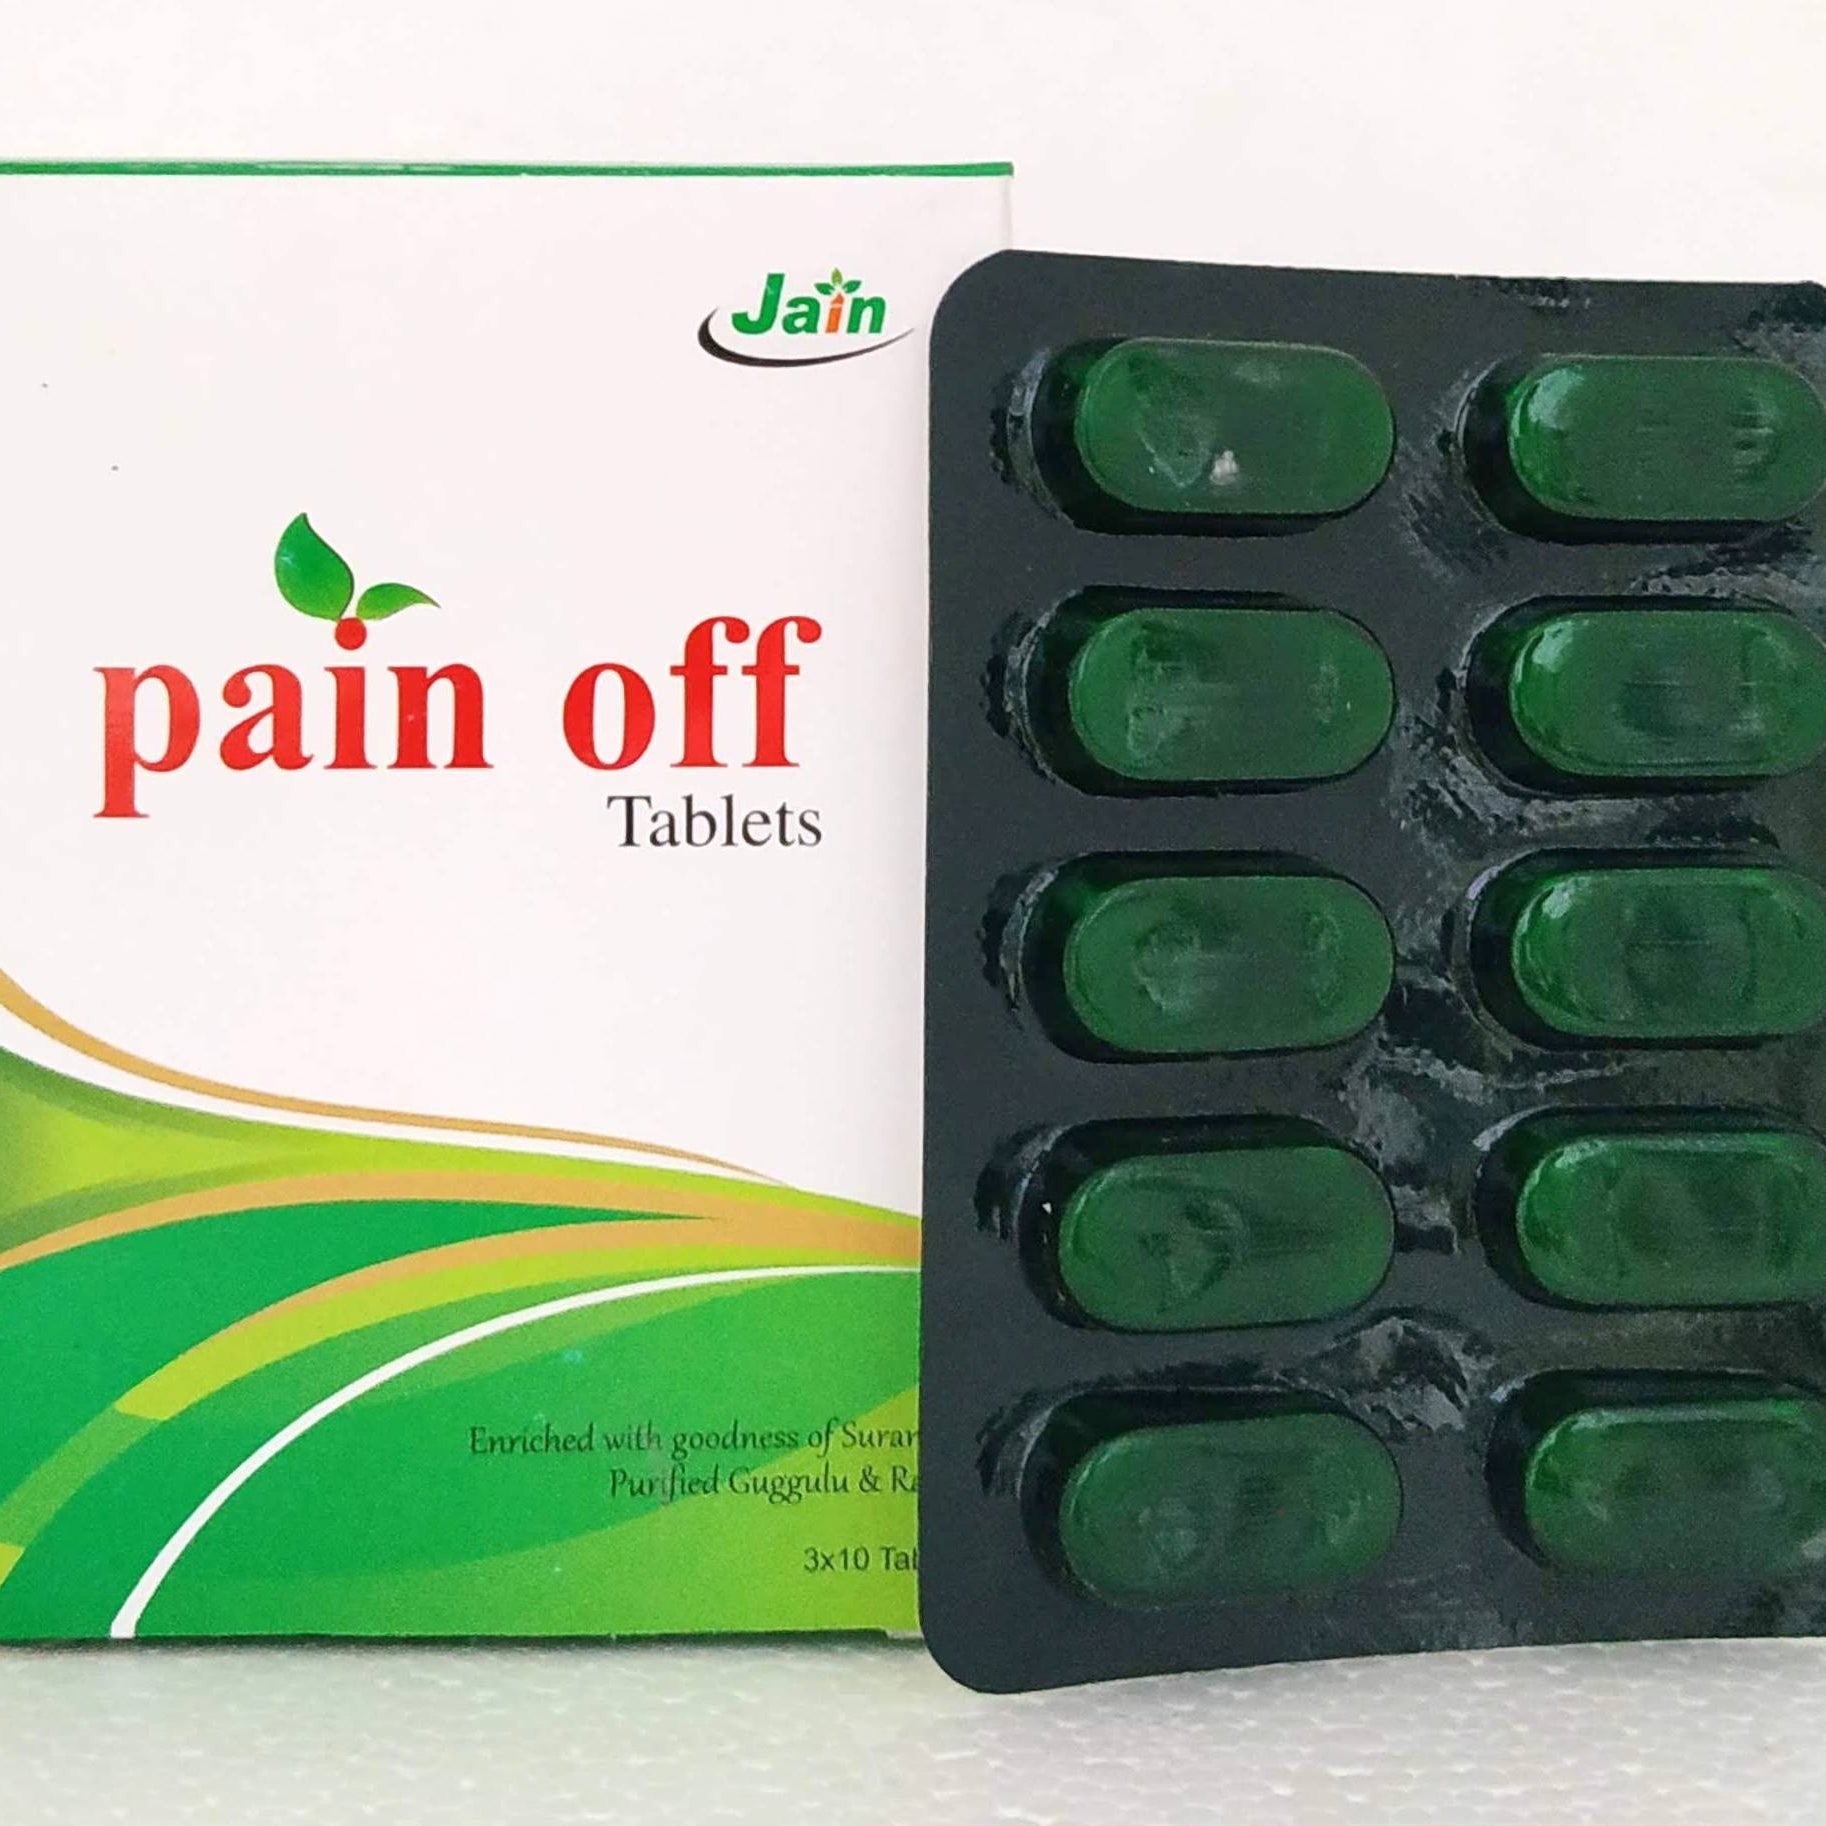 Shop Pain off Tablets - 10Tablets at price 40.00 from Jain Online - Ayush Care